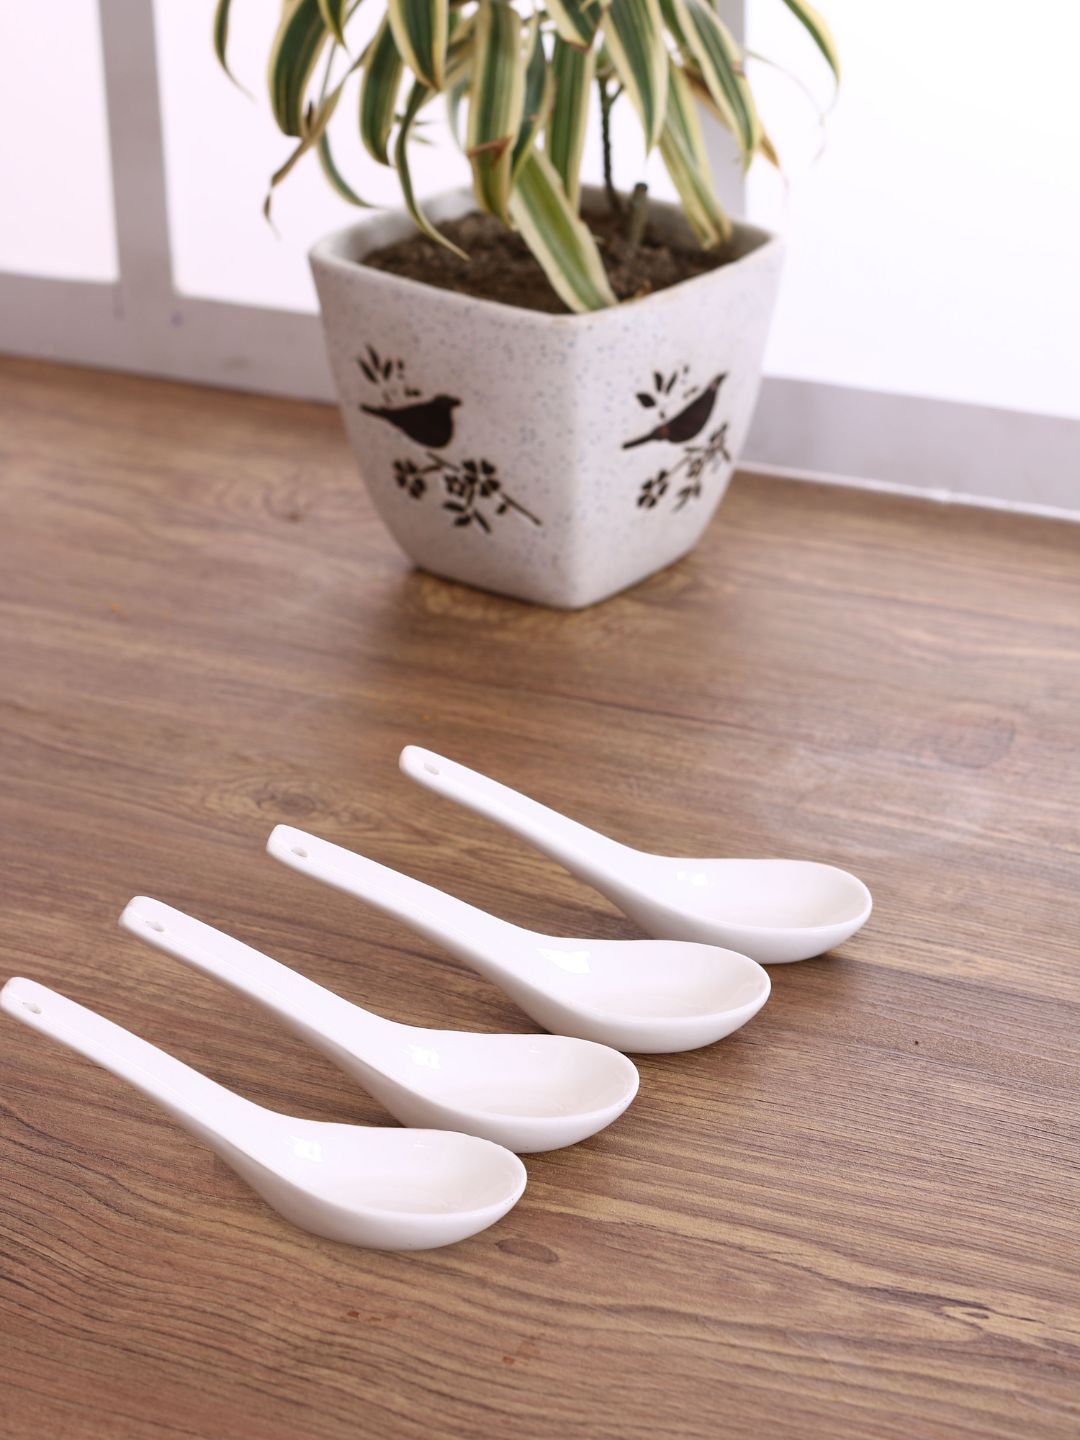 Clay Craft Basic Soup Spoon, Plain White, 4 pieces